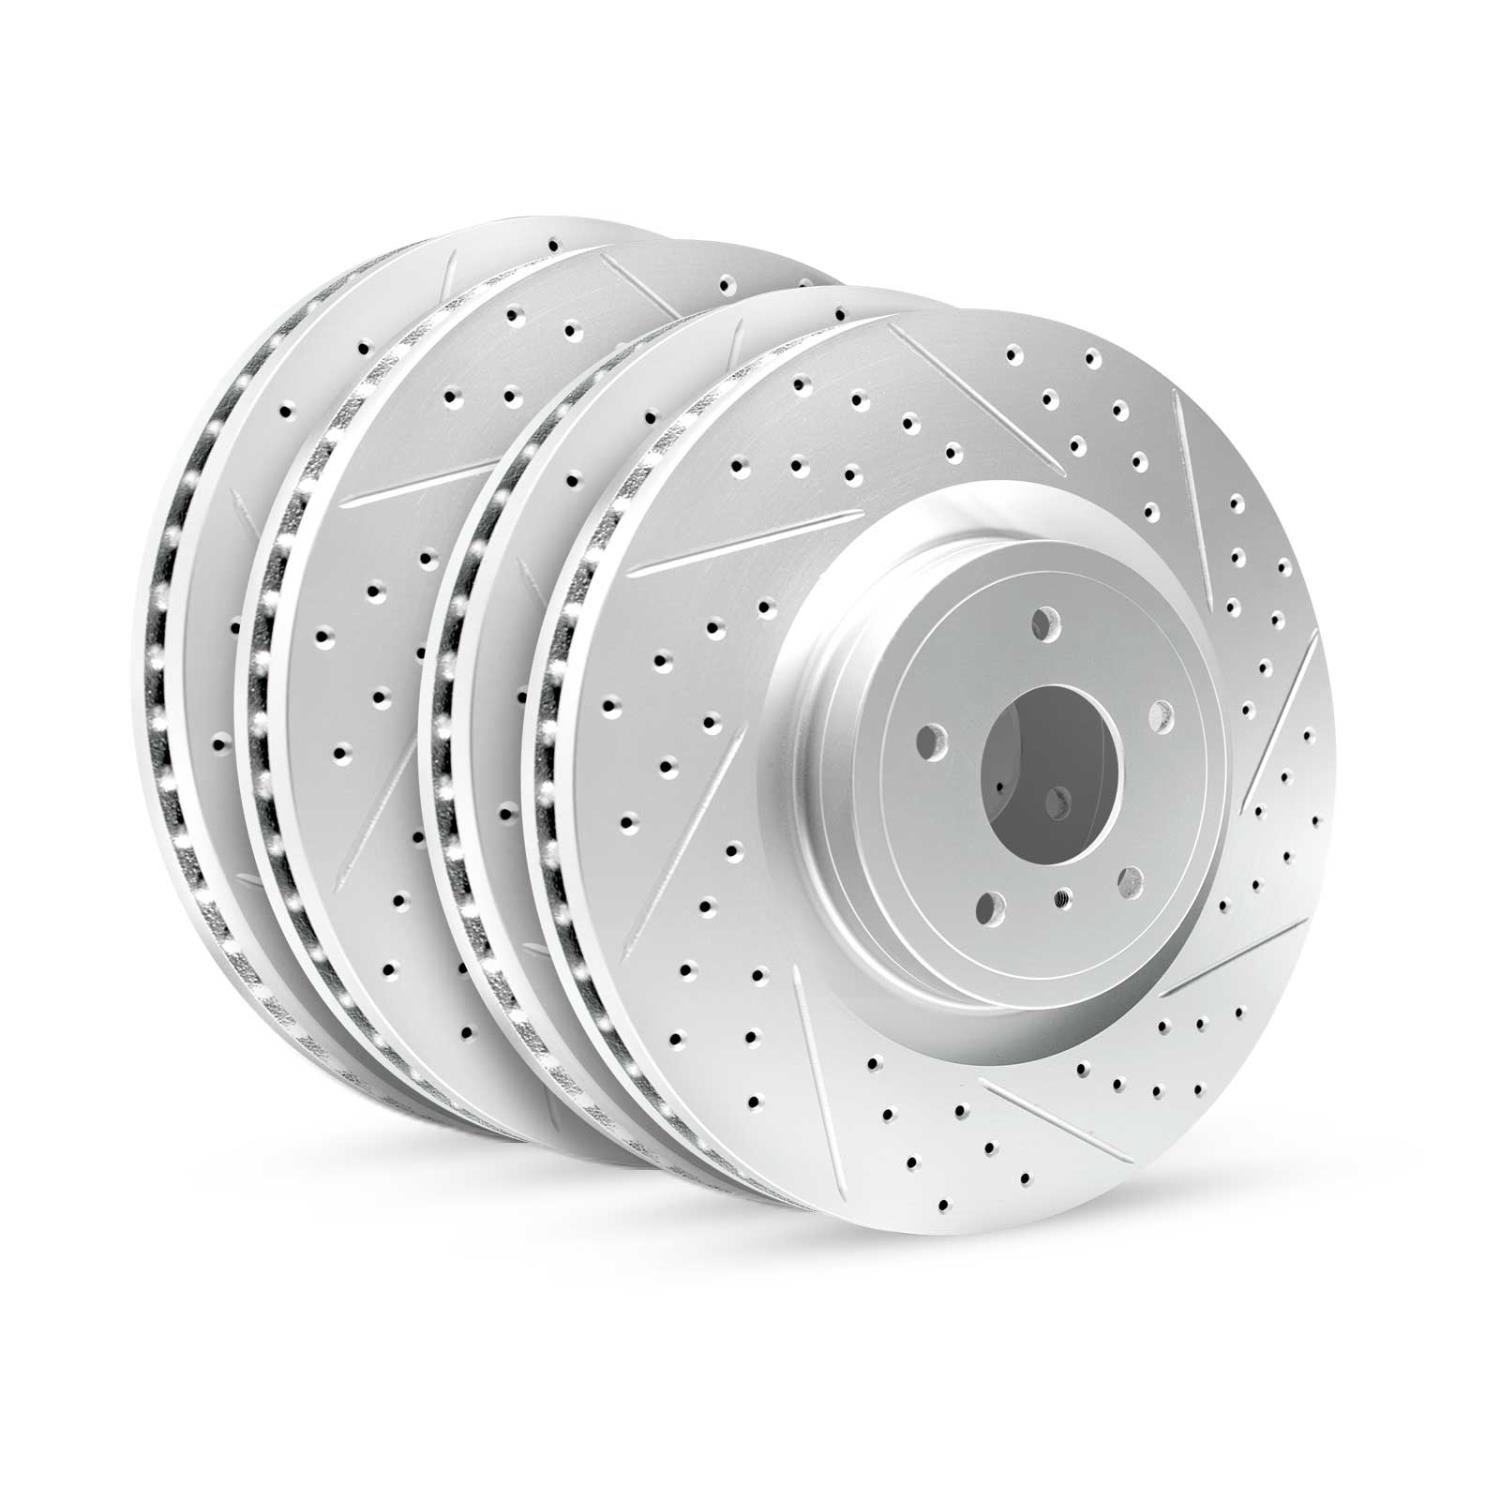 GEO-Carbon Drilled/Slotted Rotors, 2013-2020 Kia/Hyundai/Genesis, Position: Front/Rear